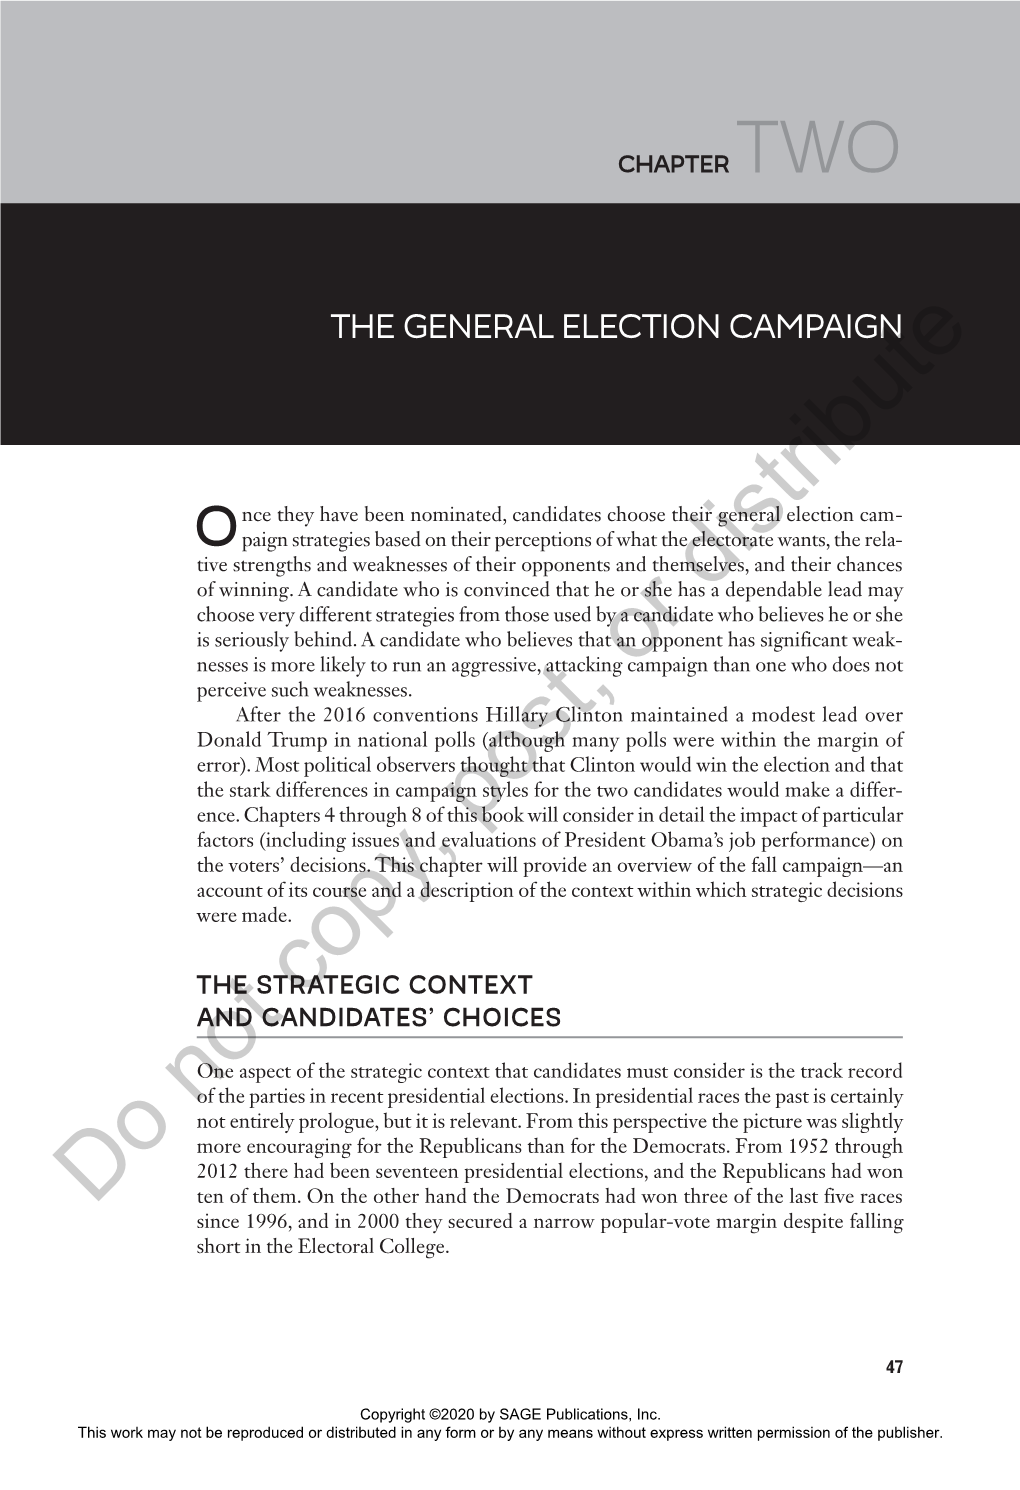 The General Election Campaign